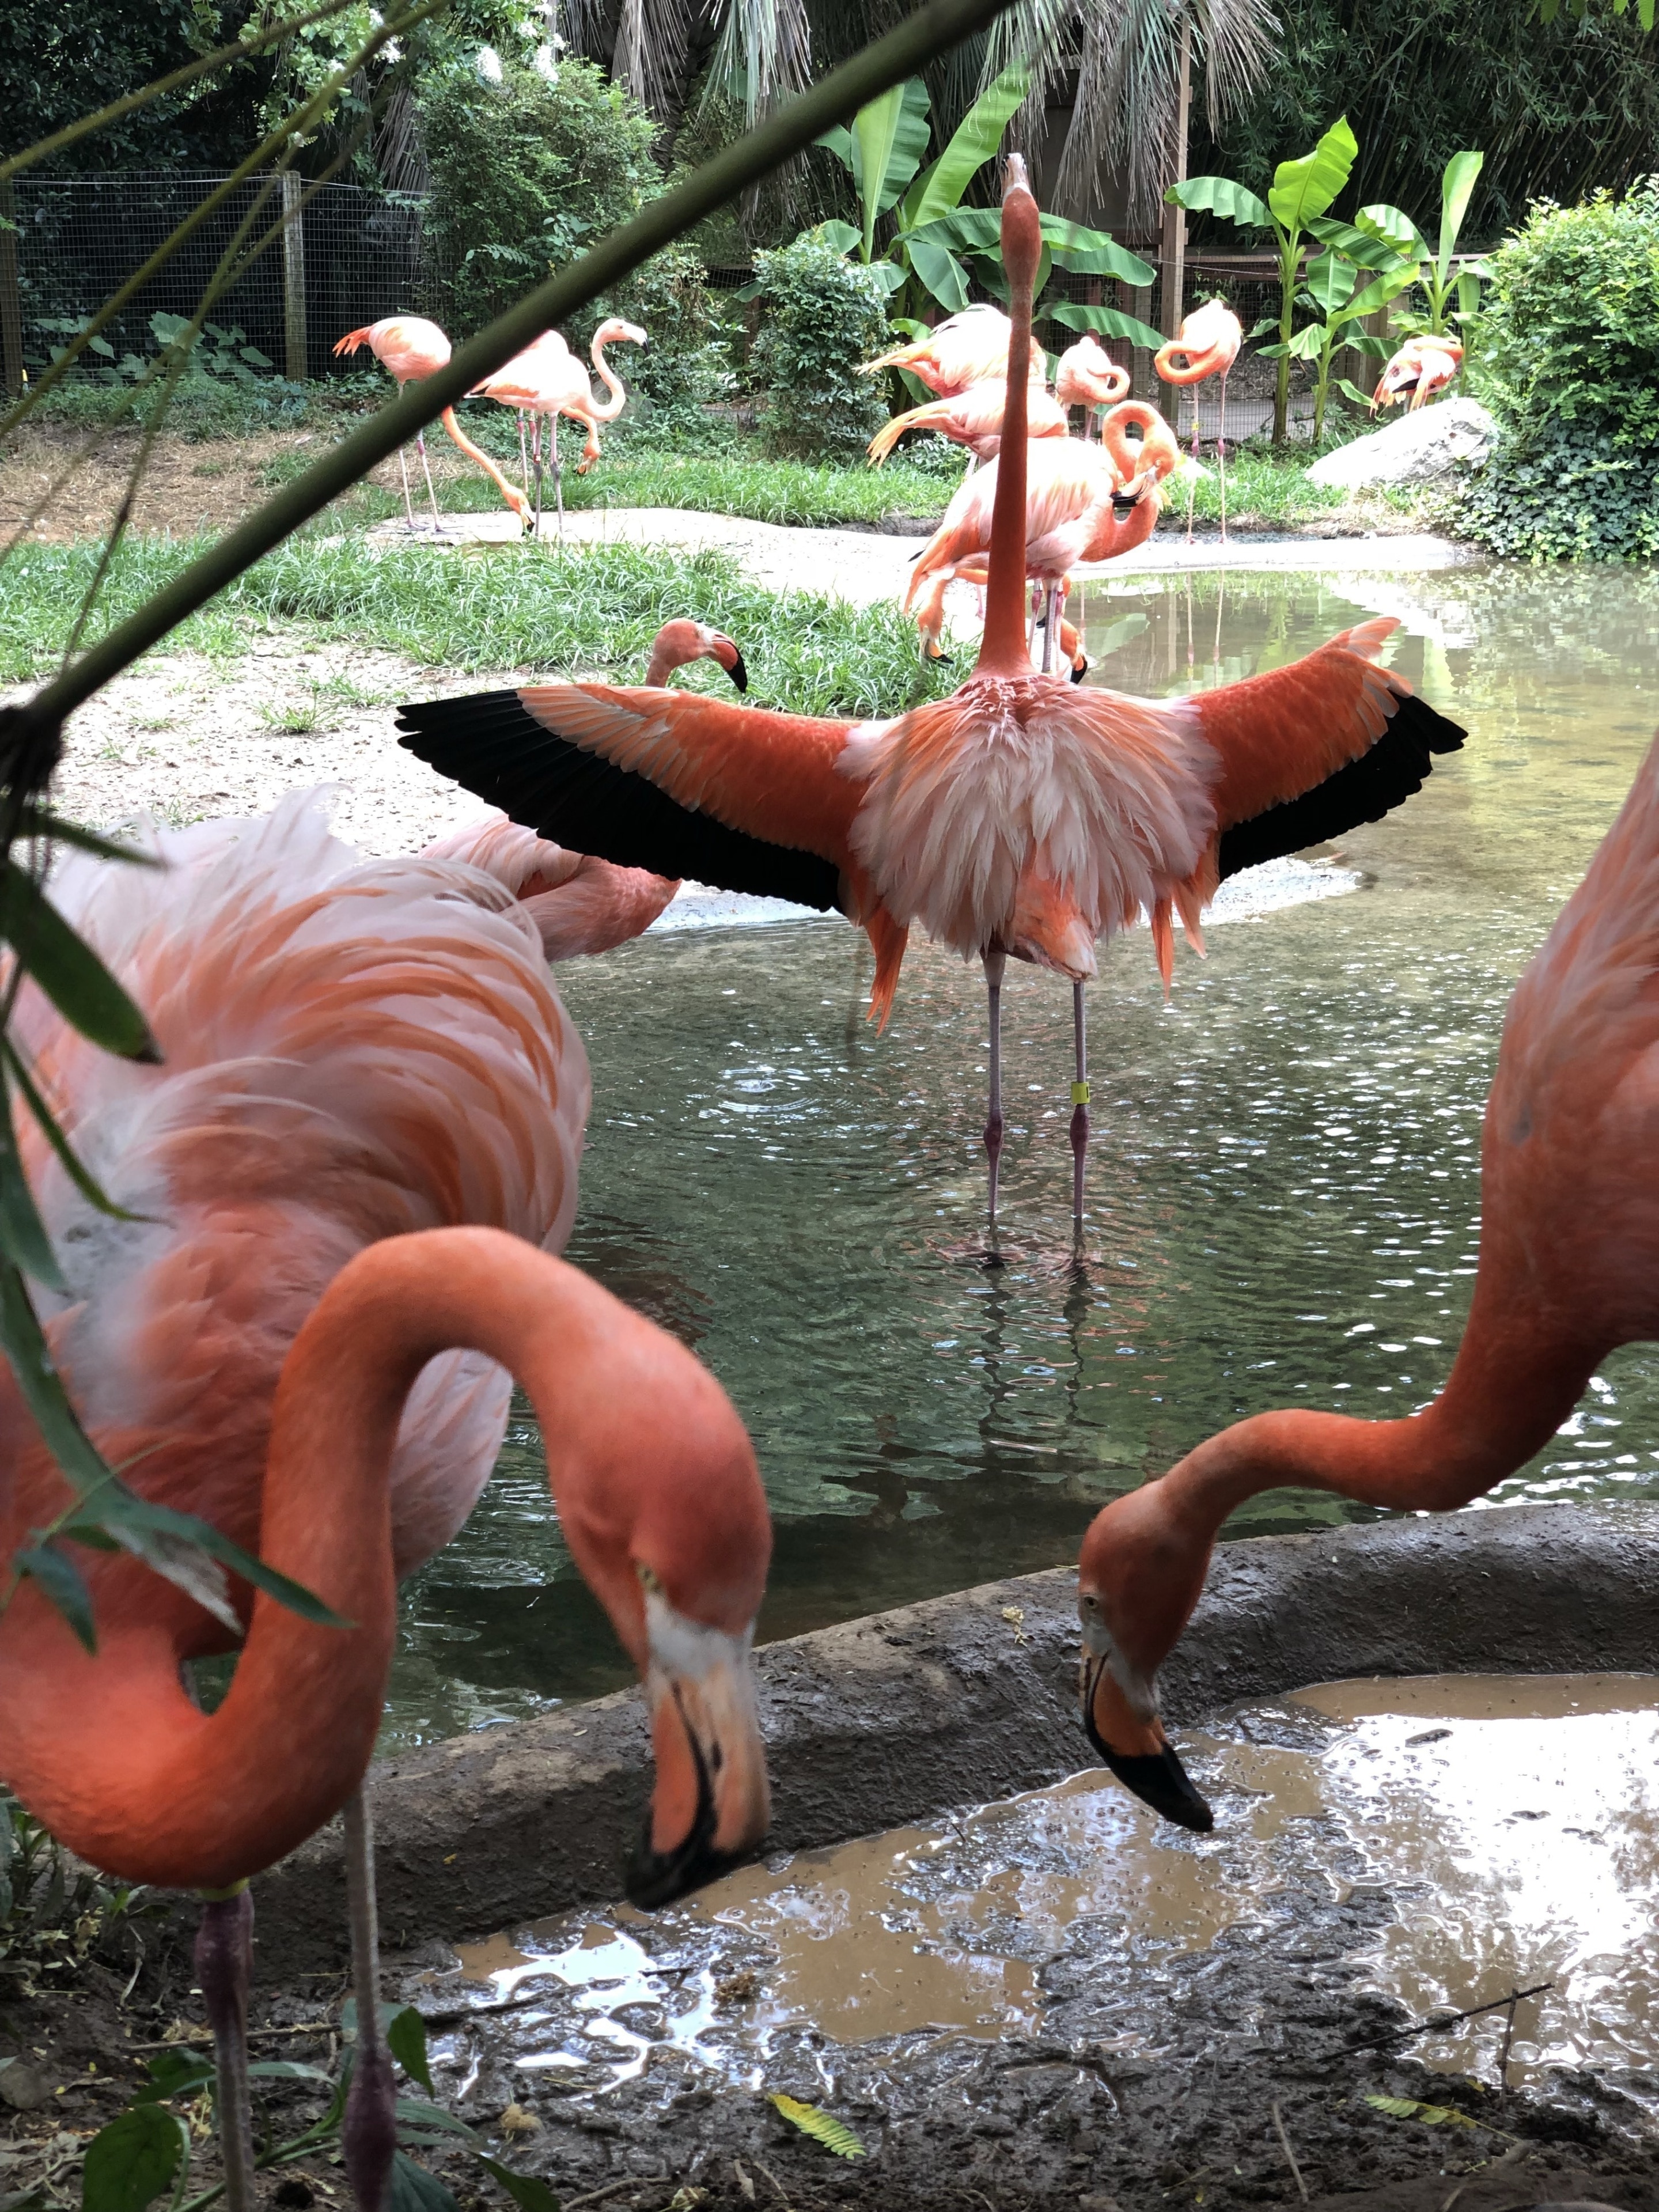 While most of the flamingos were busy, this one decided to show off #LifeAtExpedia